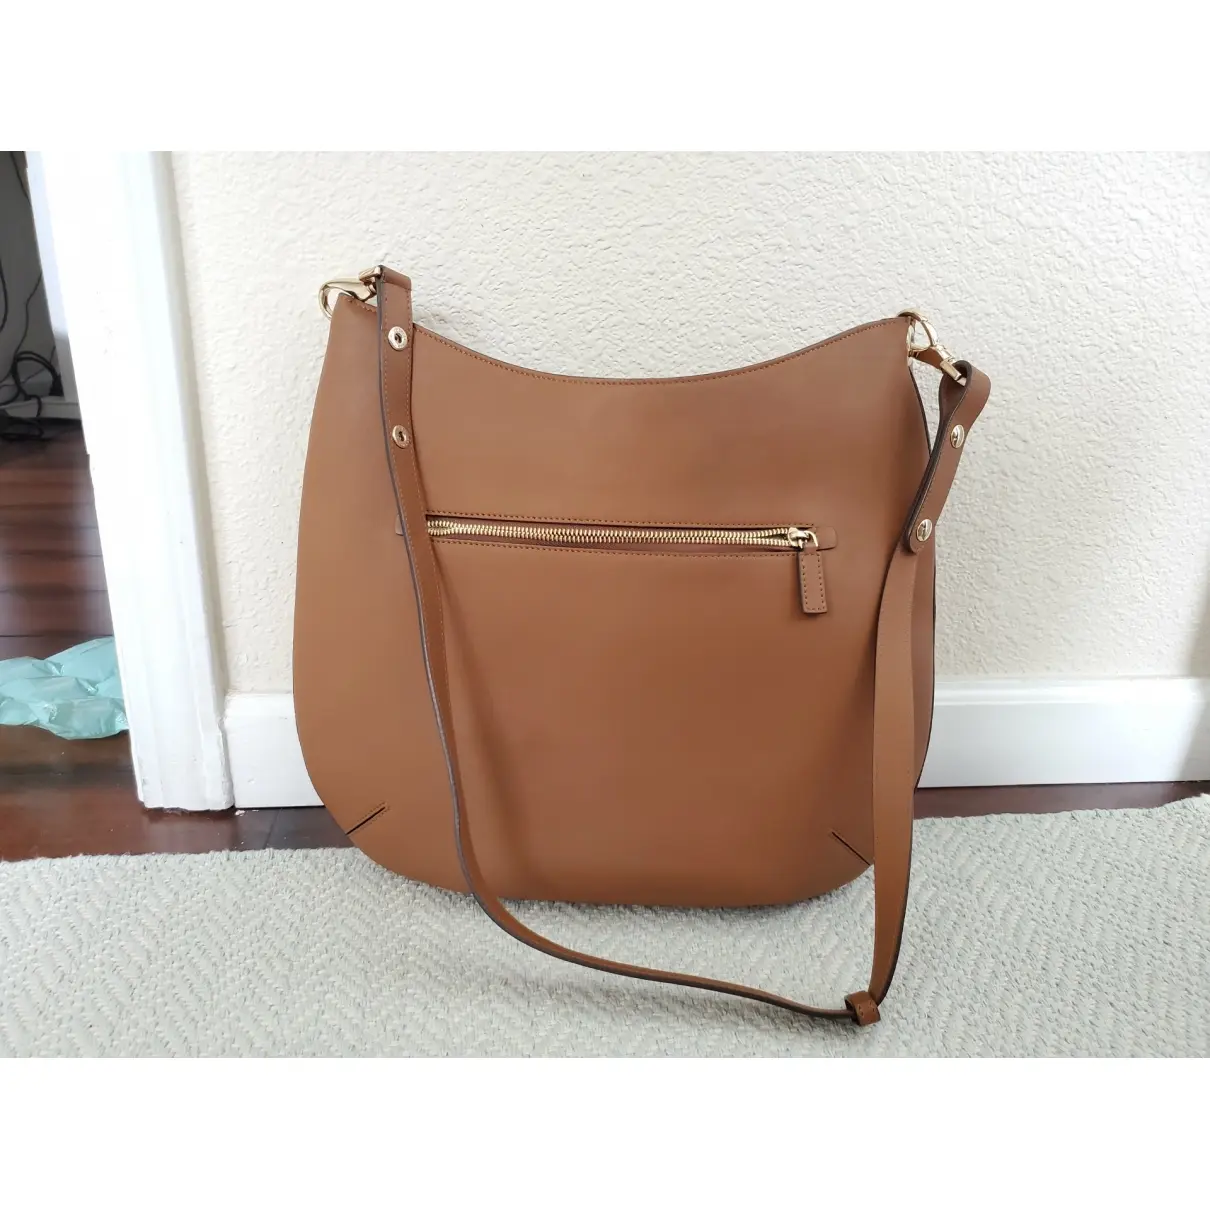 Anya Hindmarch Leather bag for sale